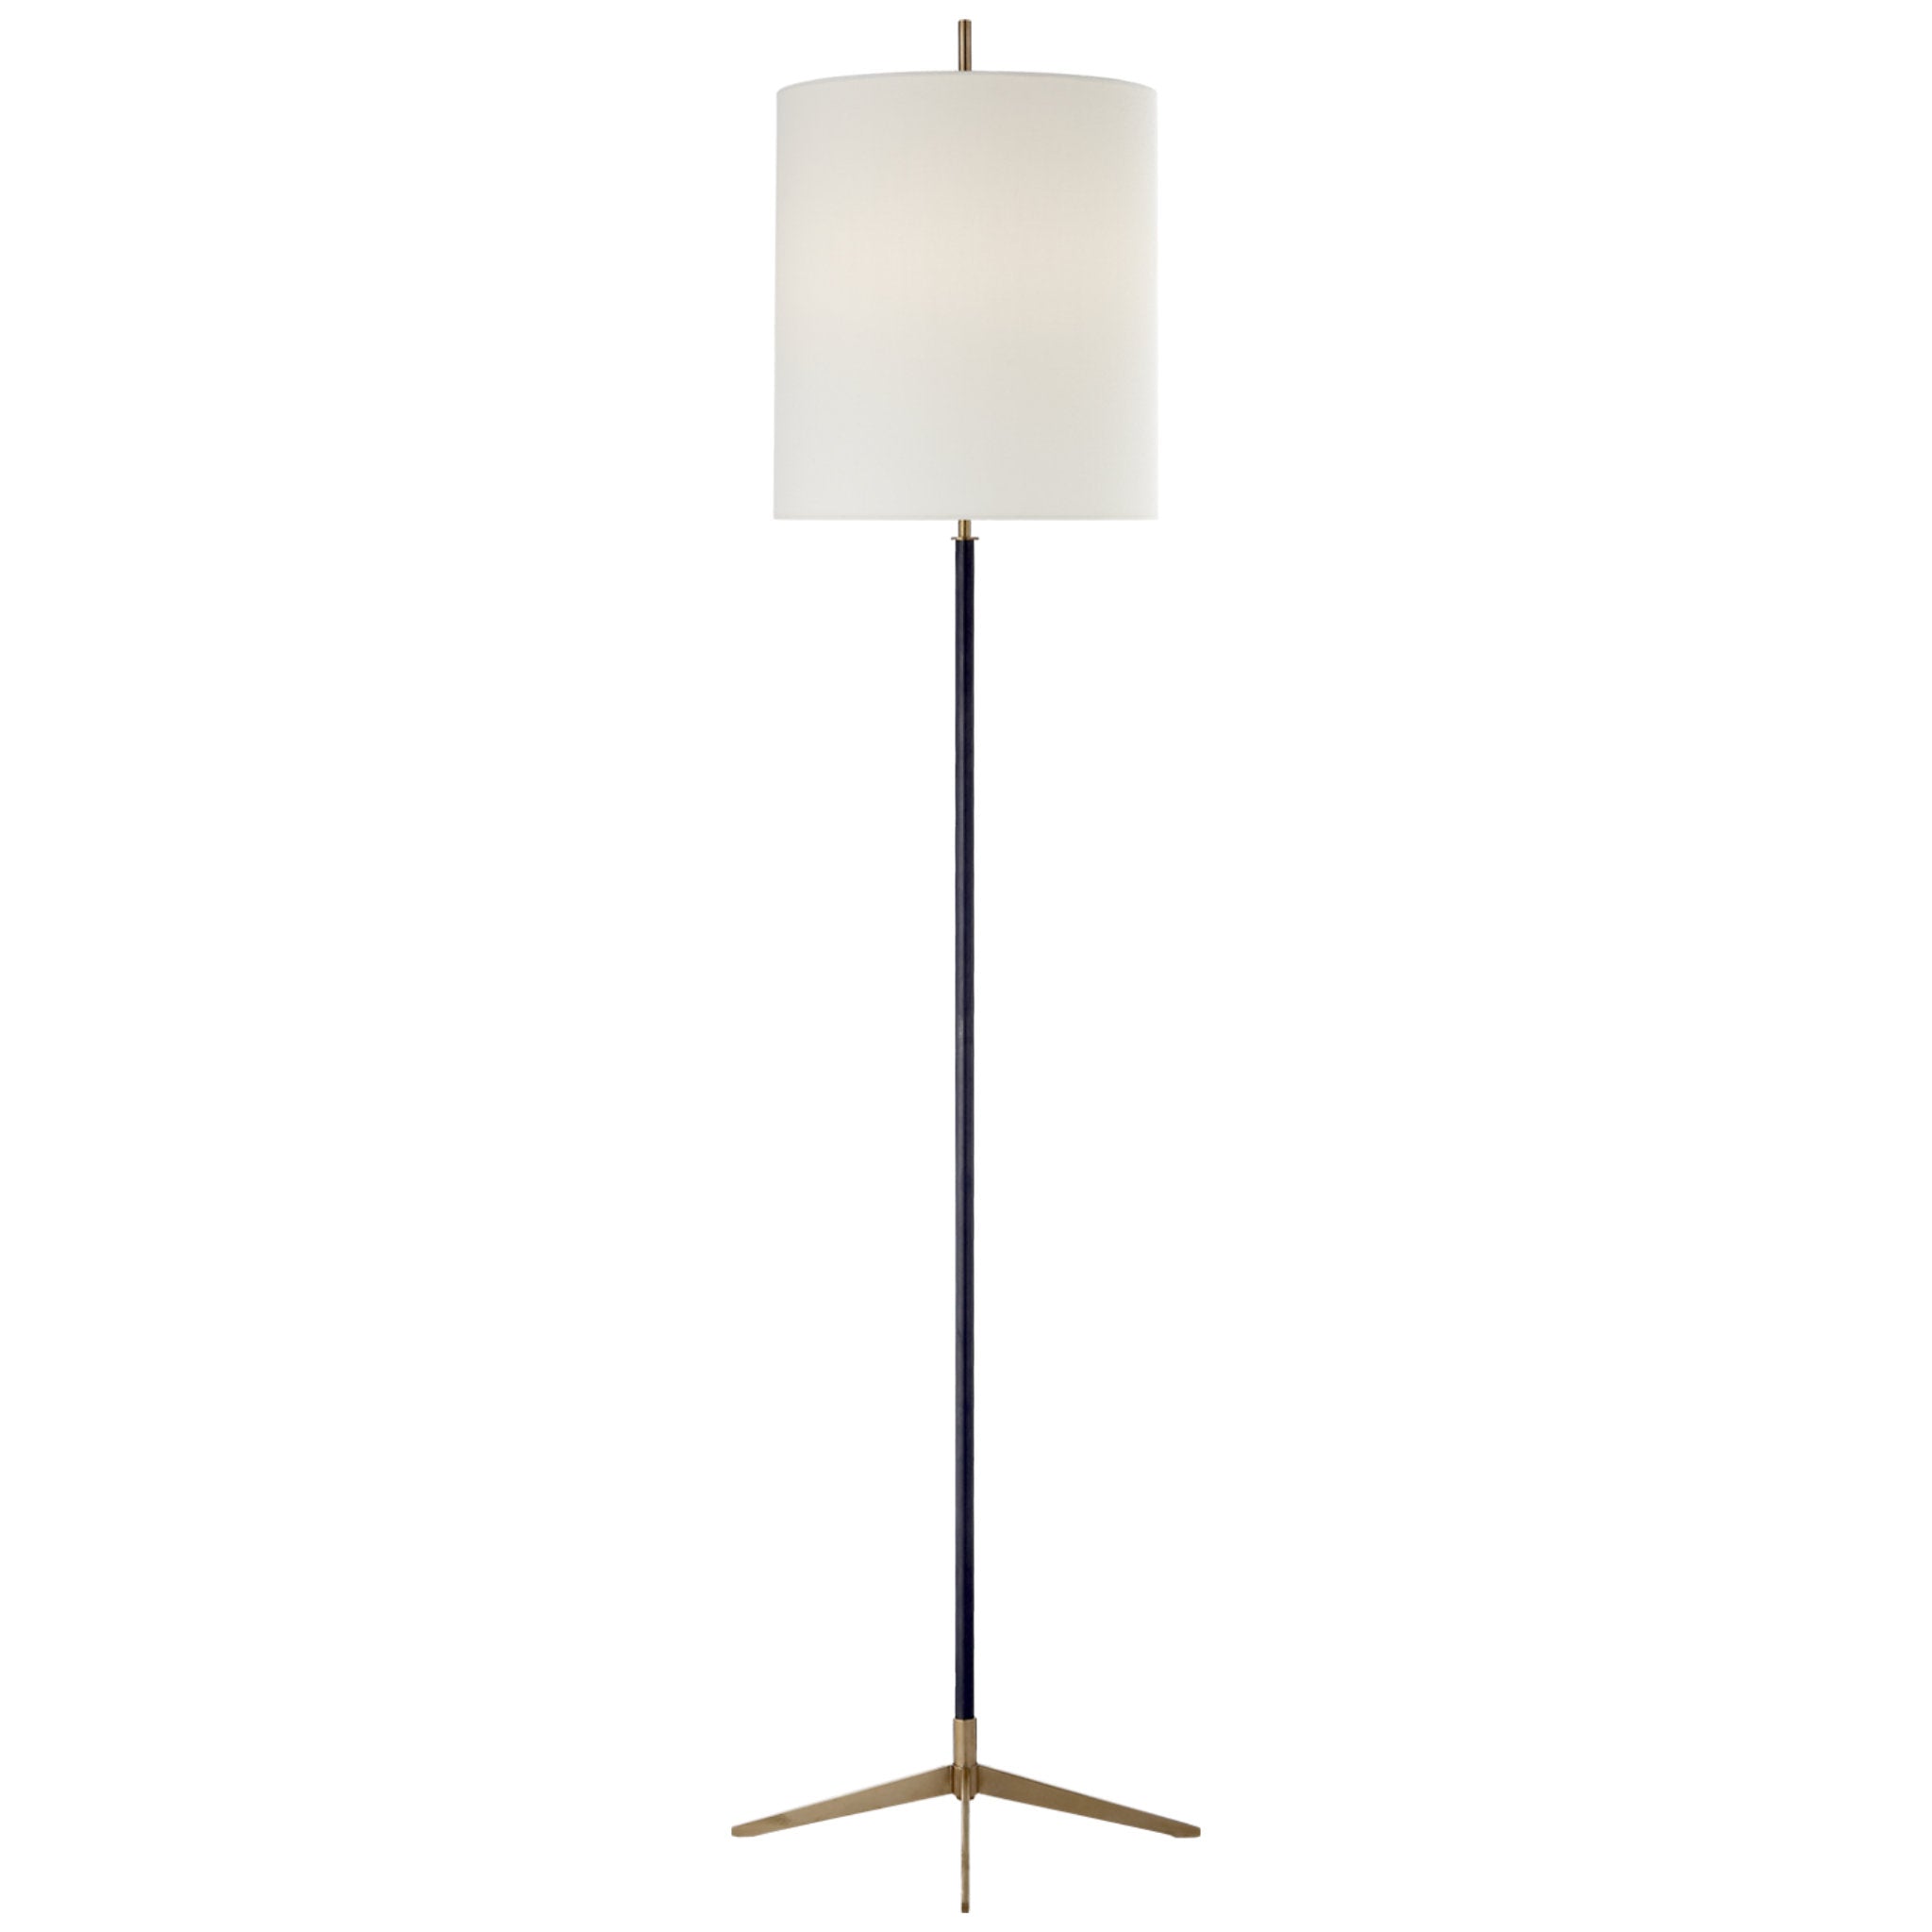 Thomas O'Brien Caron Floor Lamp in Bronze and Hand-Rubbed Antique Brass with Linen Shade